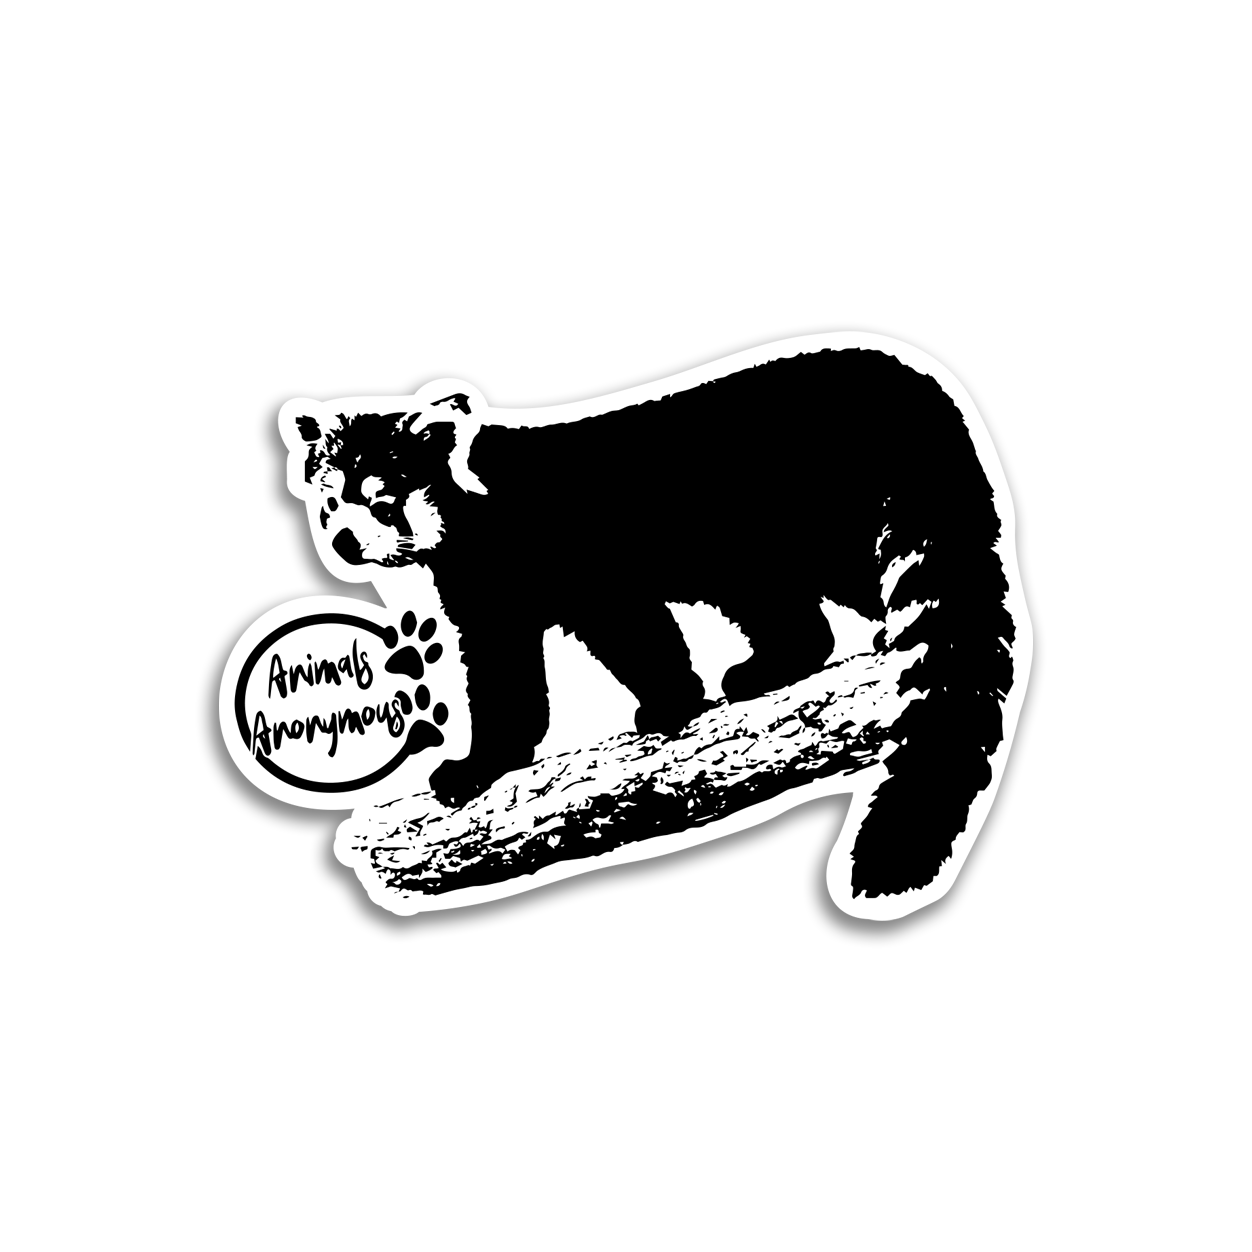 Red Panda on a Branch - Sticker - Animals Anonymous Apparel